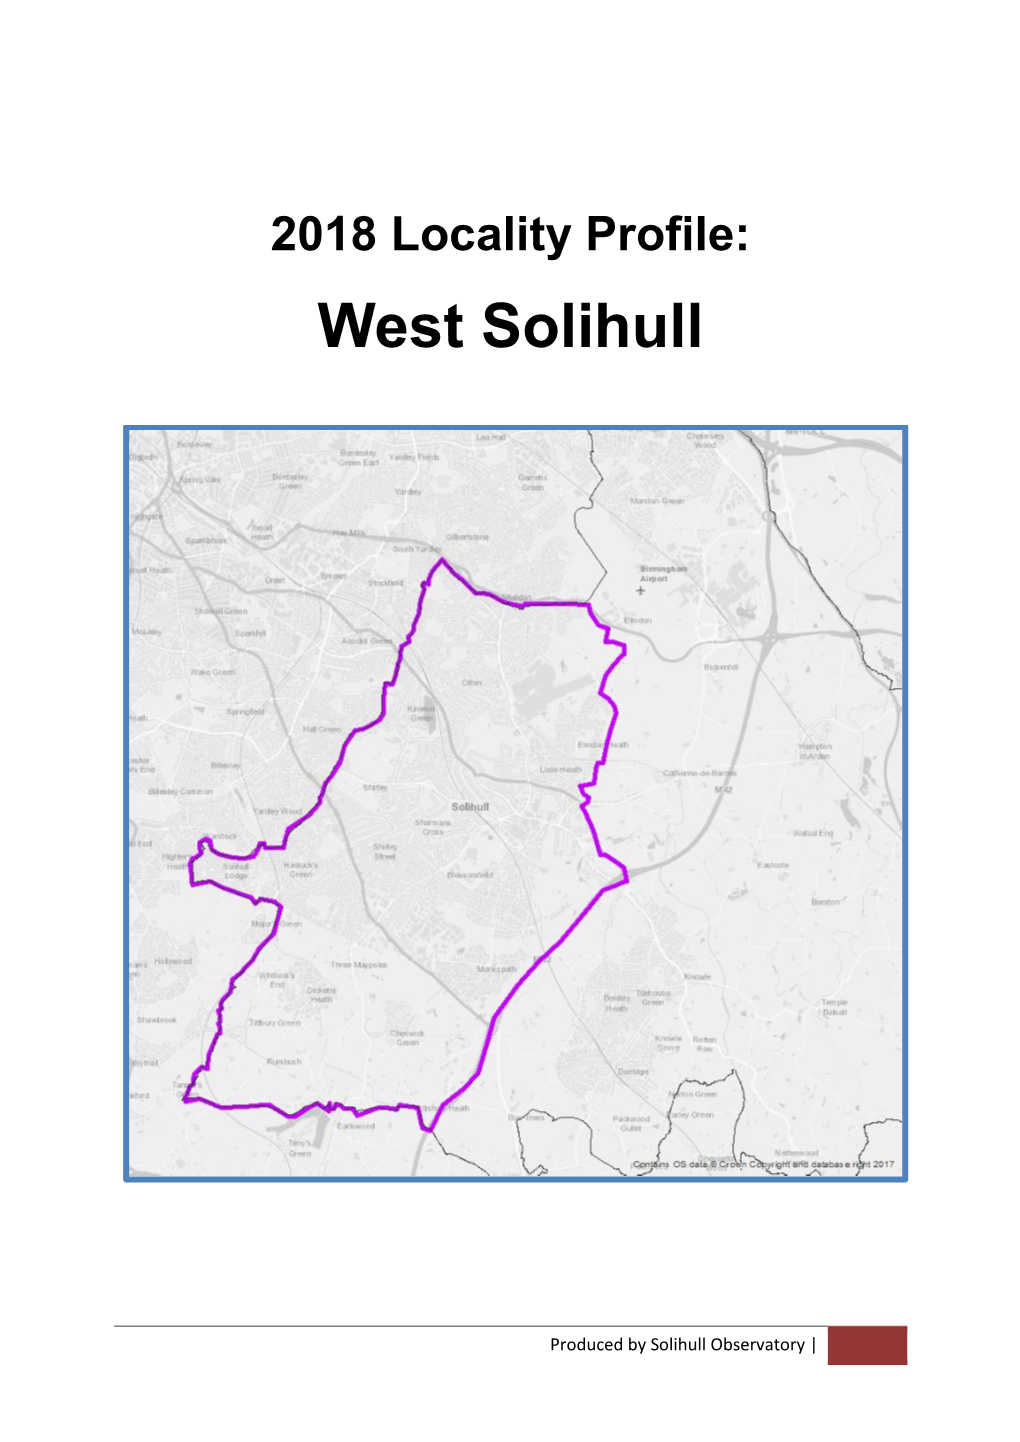 West Solihull Locality Profile